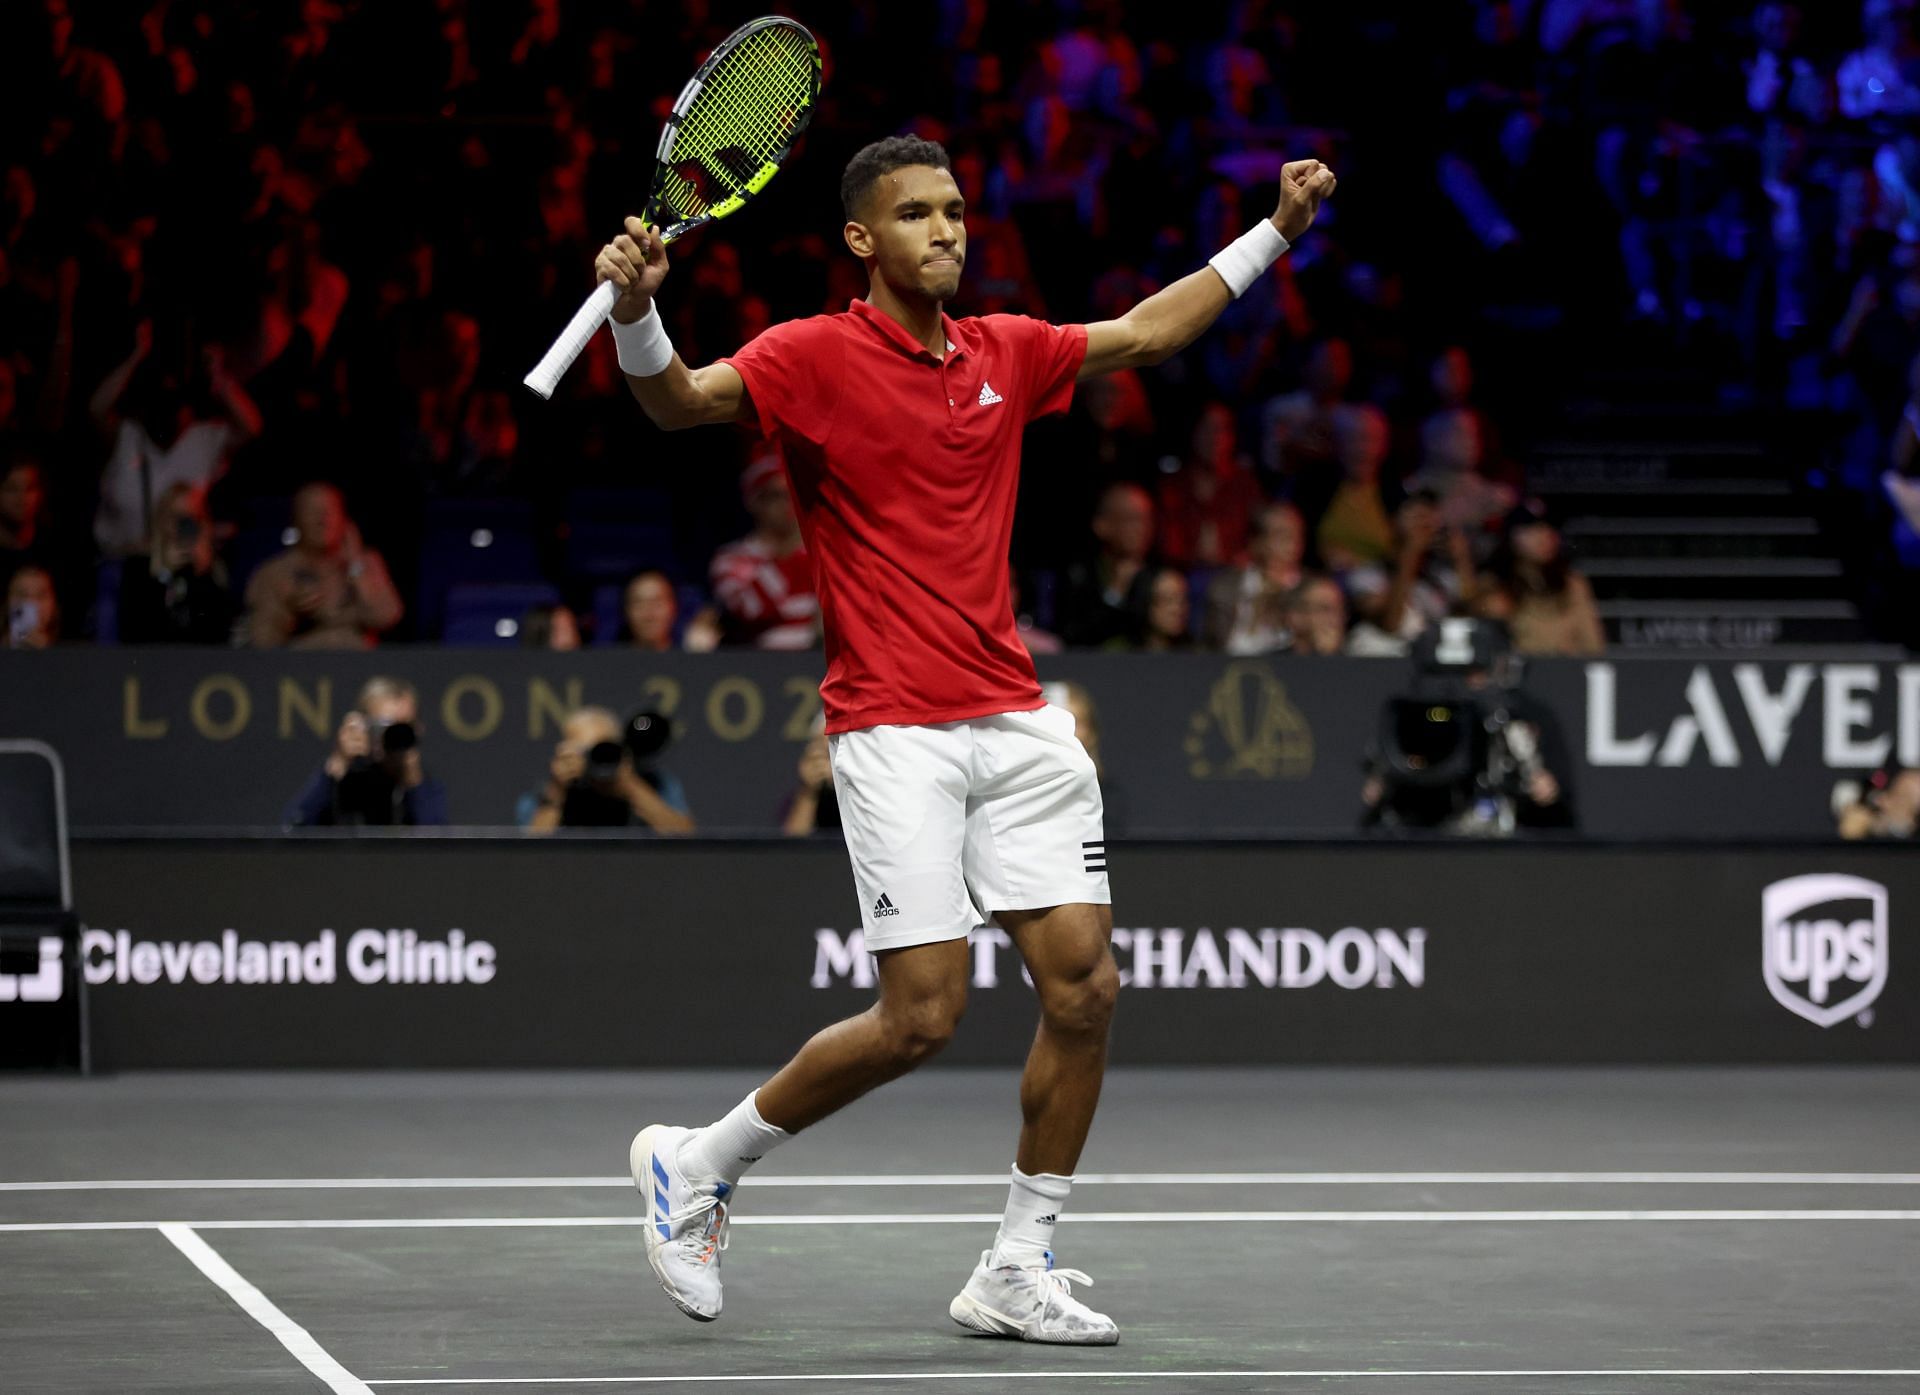 Felix Auger-Aliassime at the 2022 Laver Cup.